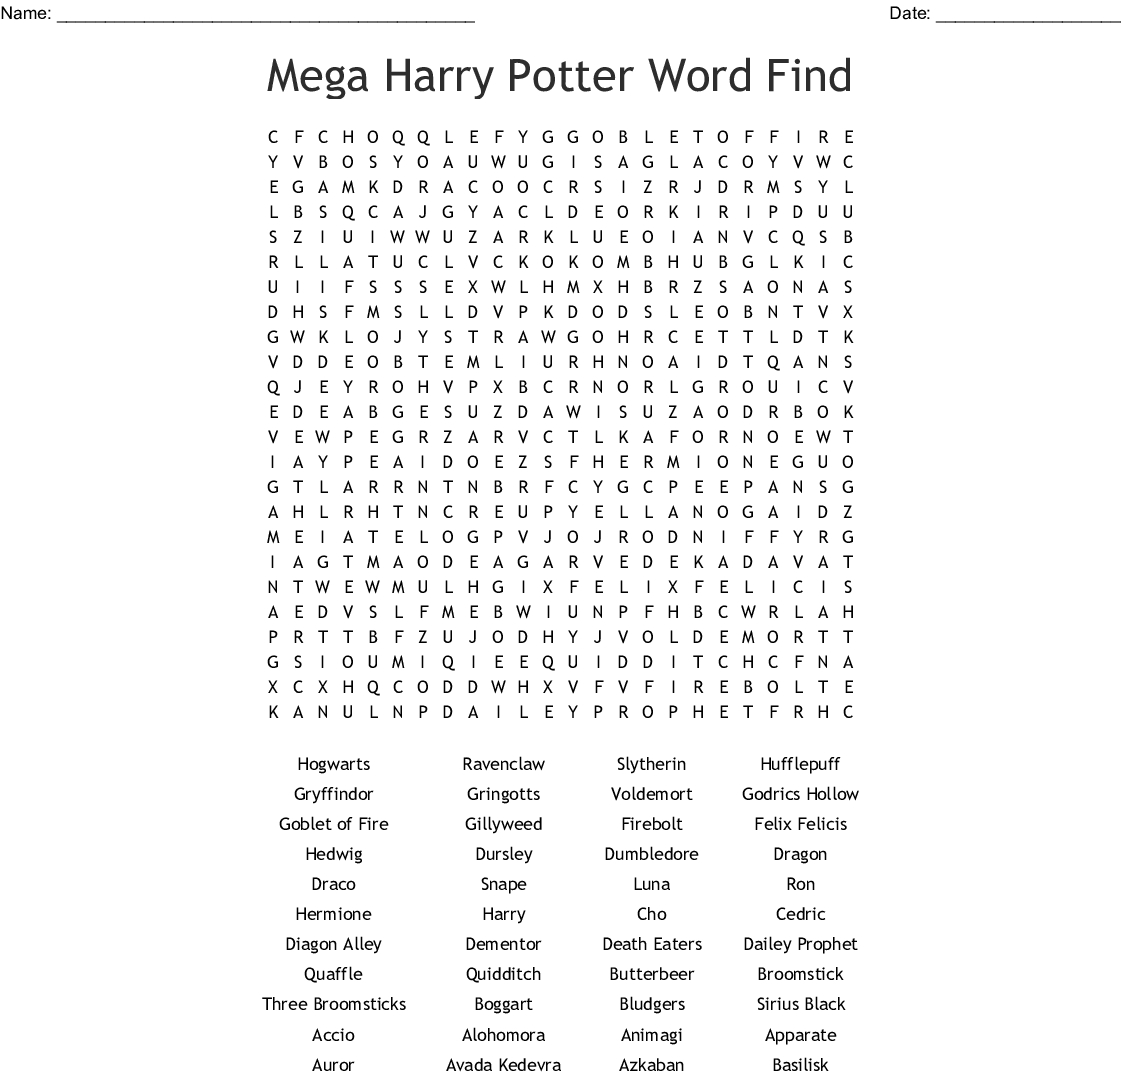 Mega Harry Potter Word Find Word Search - Wordmint